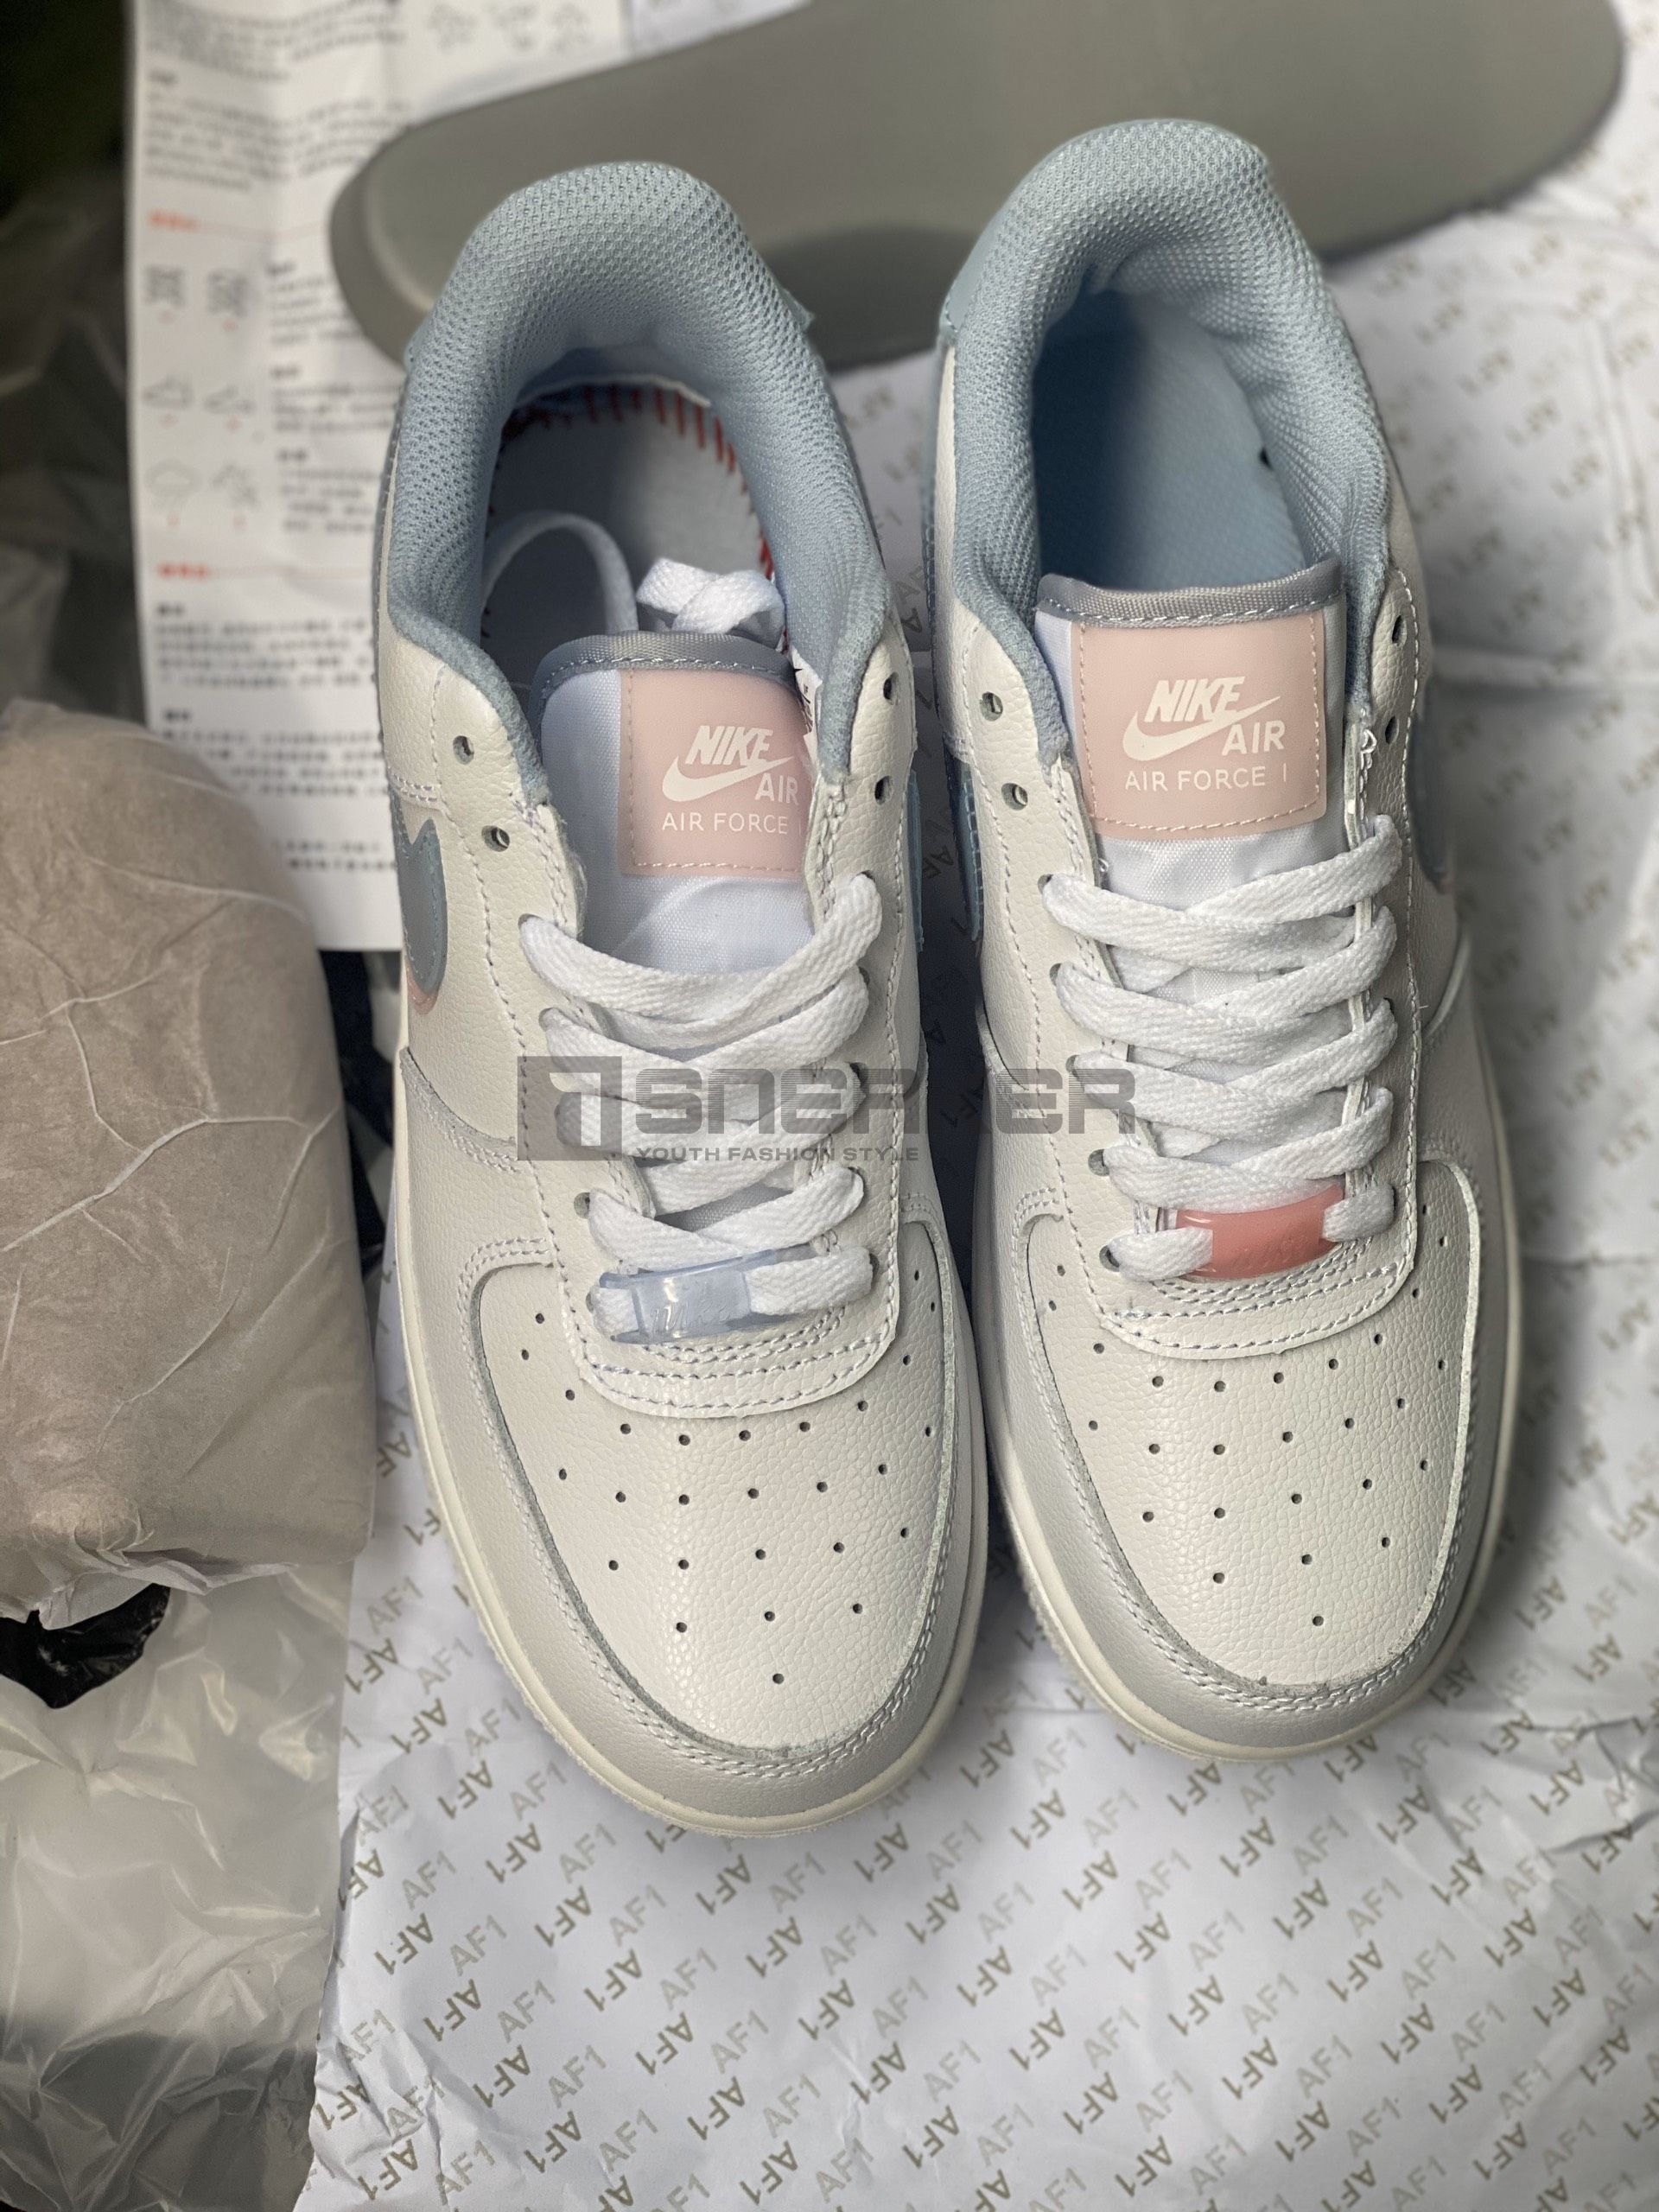 AIR FORCE 1 LOW LV8 GS DOUBLE SWOOSH NIKE Hong Baby 6